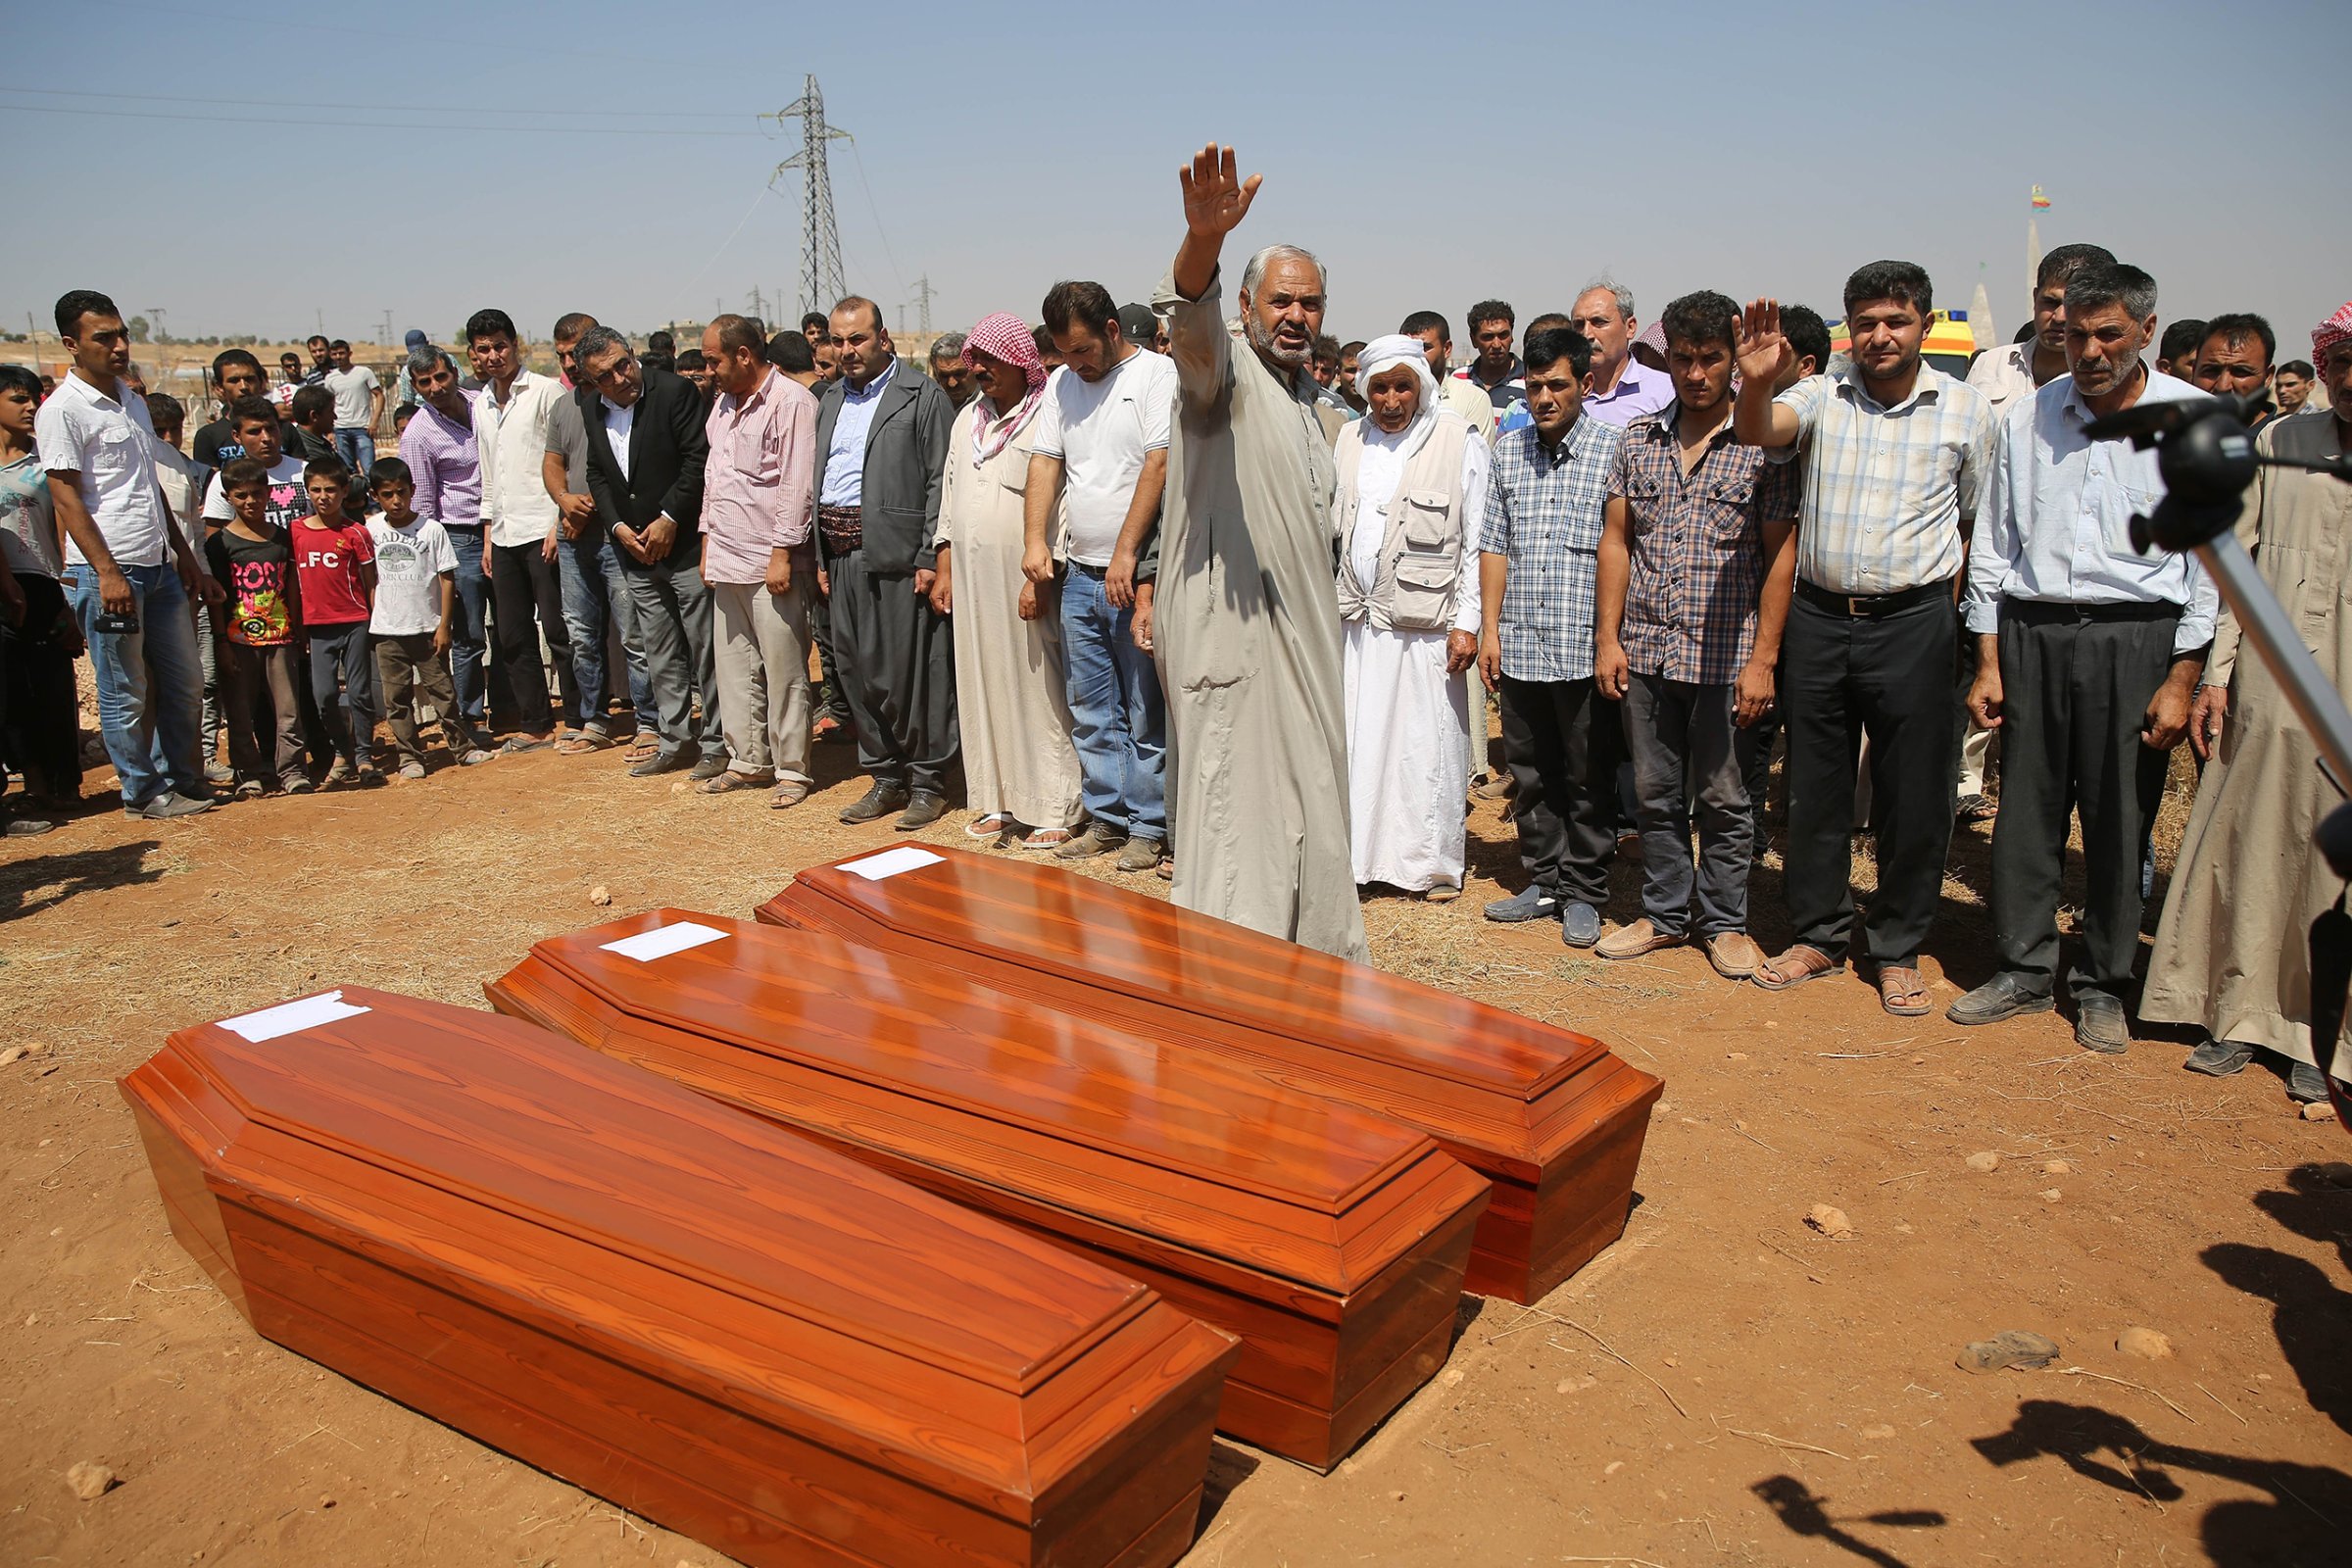 Relatives hold funeral of Syrian children Aylan, 2, his brother Galip, 3, and husband of Zahin Kurdi, 27, who drowned after their boat sank en route to the Greek islands in the Aegean Sea, in the Syrian border town of Kobani (Ayn al-Arab) on Sept. 4, 2015.